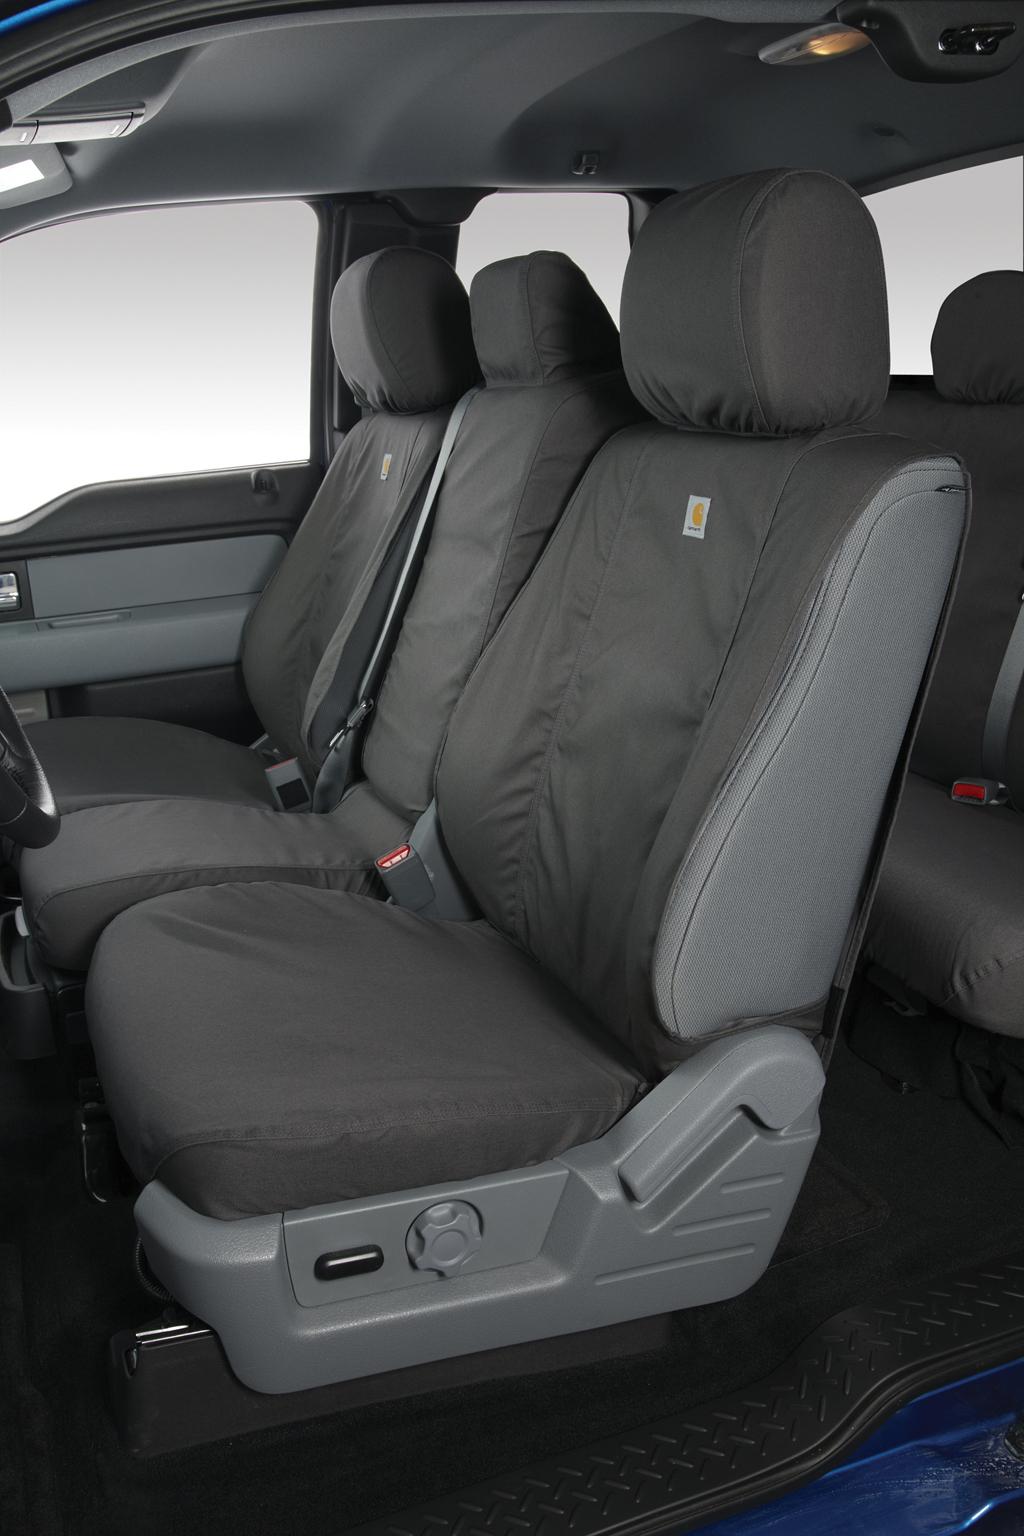 Seat Covers - Front, 40/20/40, Carhartt Gravel